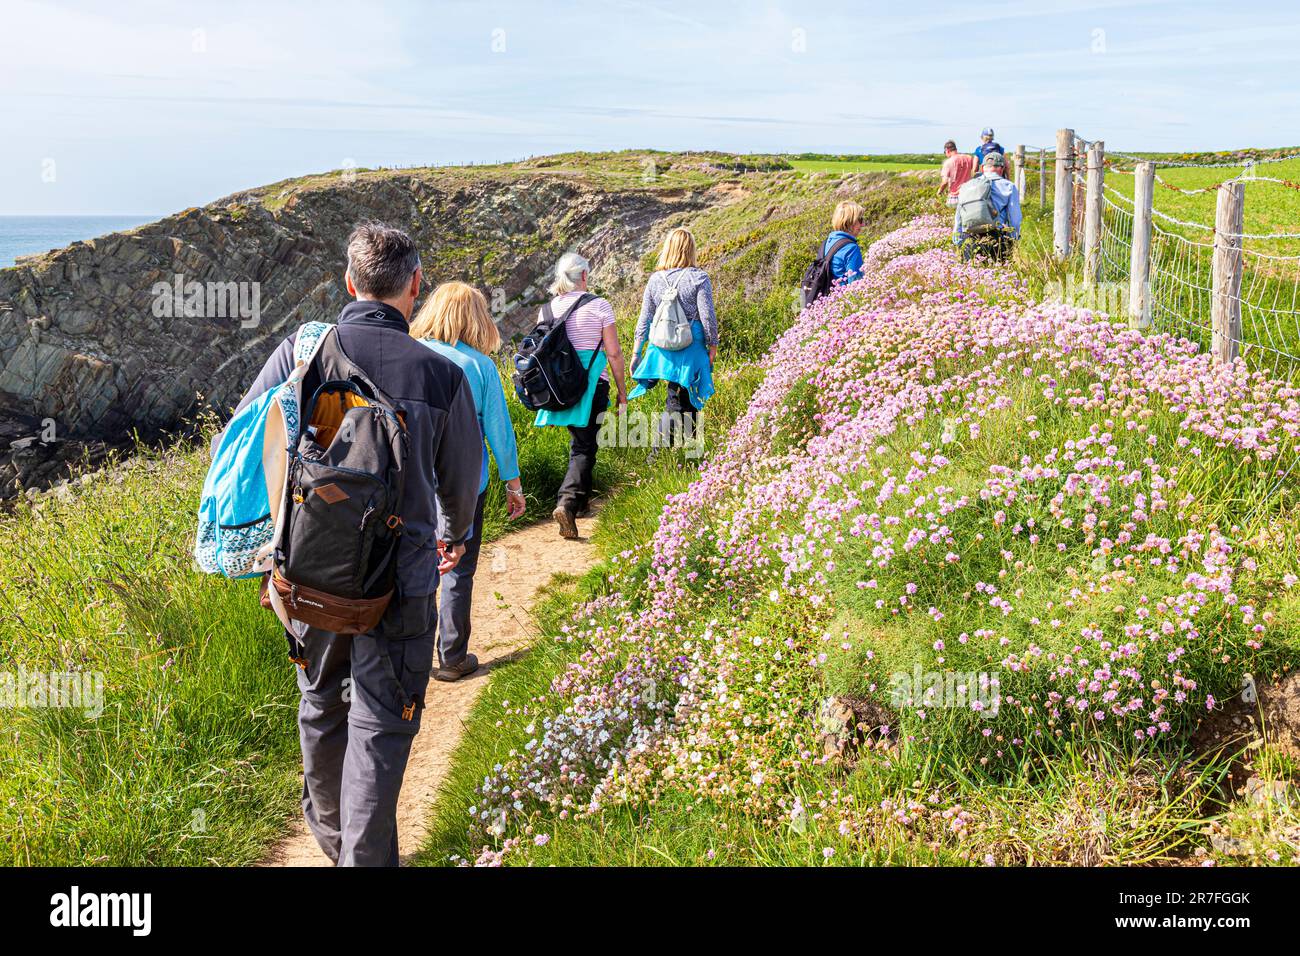 Walkers enjoying the Sea pinks (thrift) flowering beside the Pembrokeshire Coast Path National Trail at St Justinians in the National Park, Wales UK Stock Photo